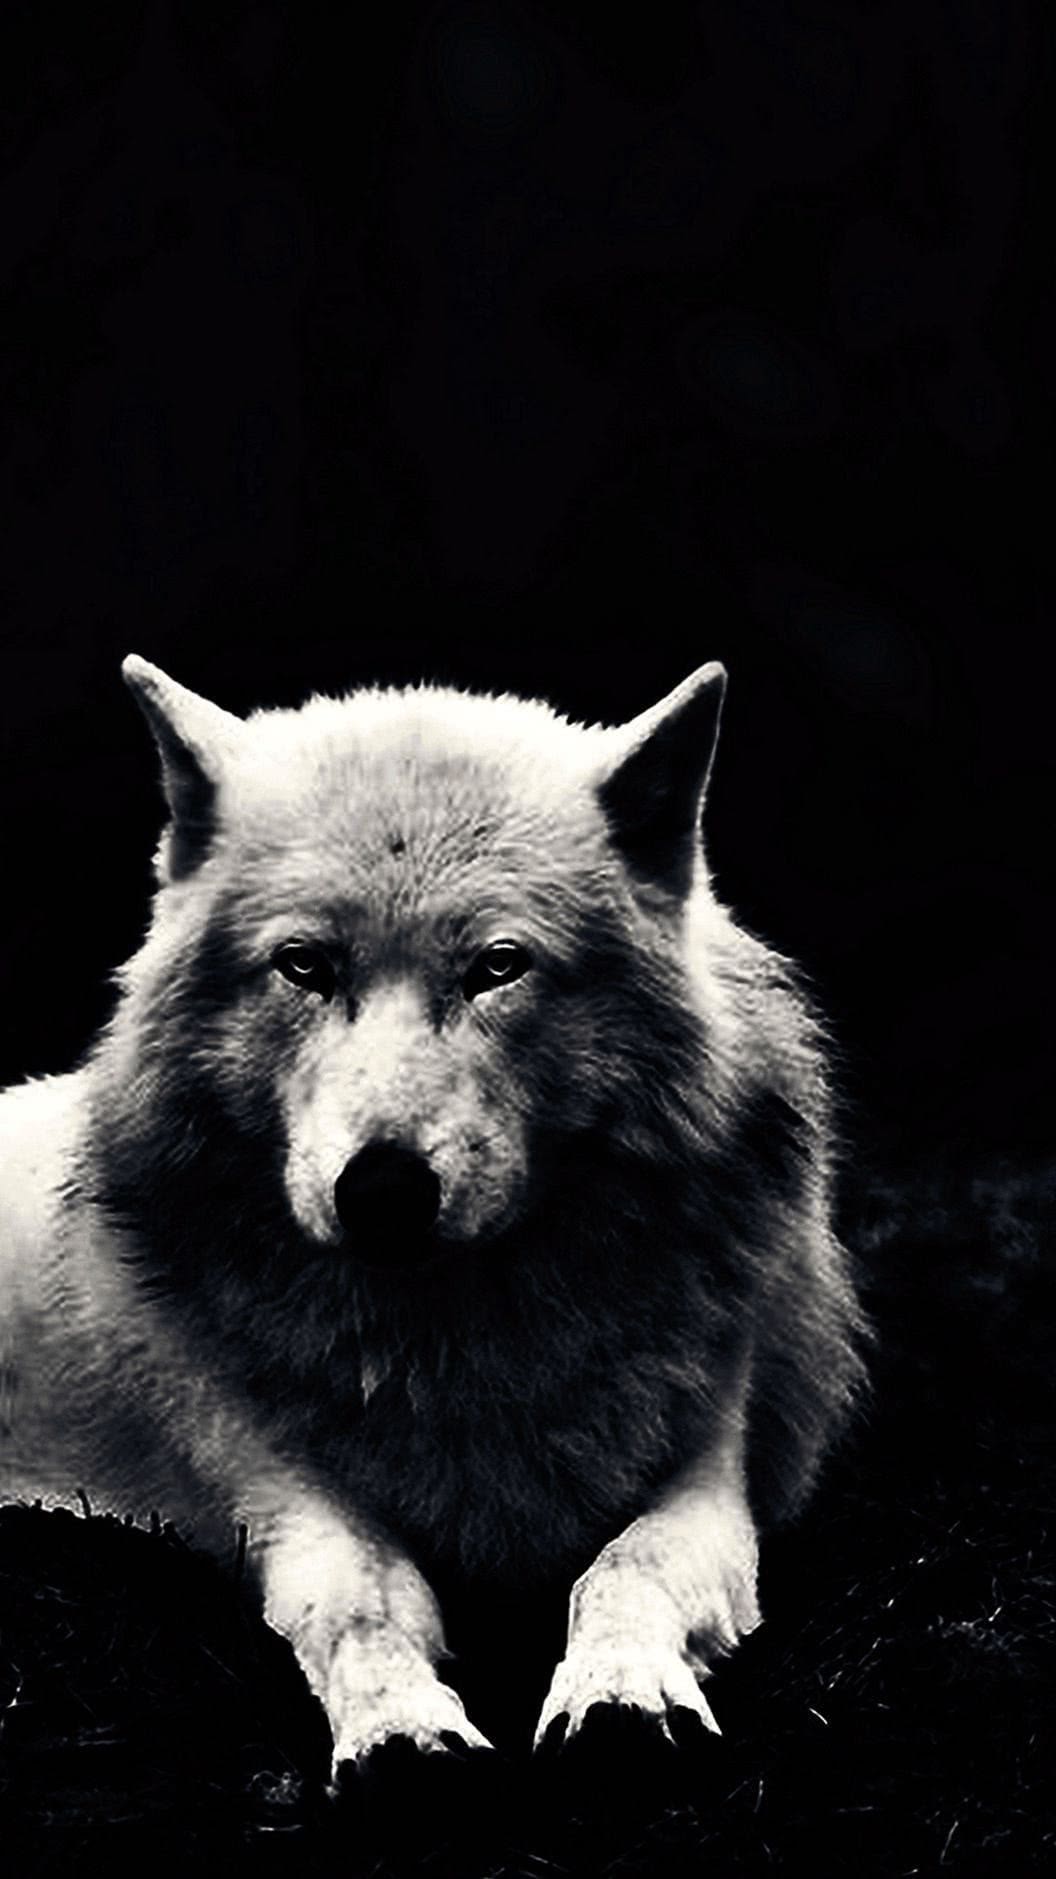 wolf wallpaper cell phone background image 6